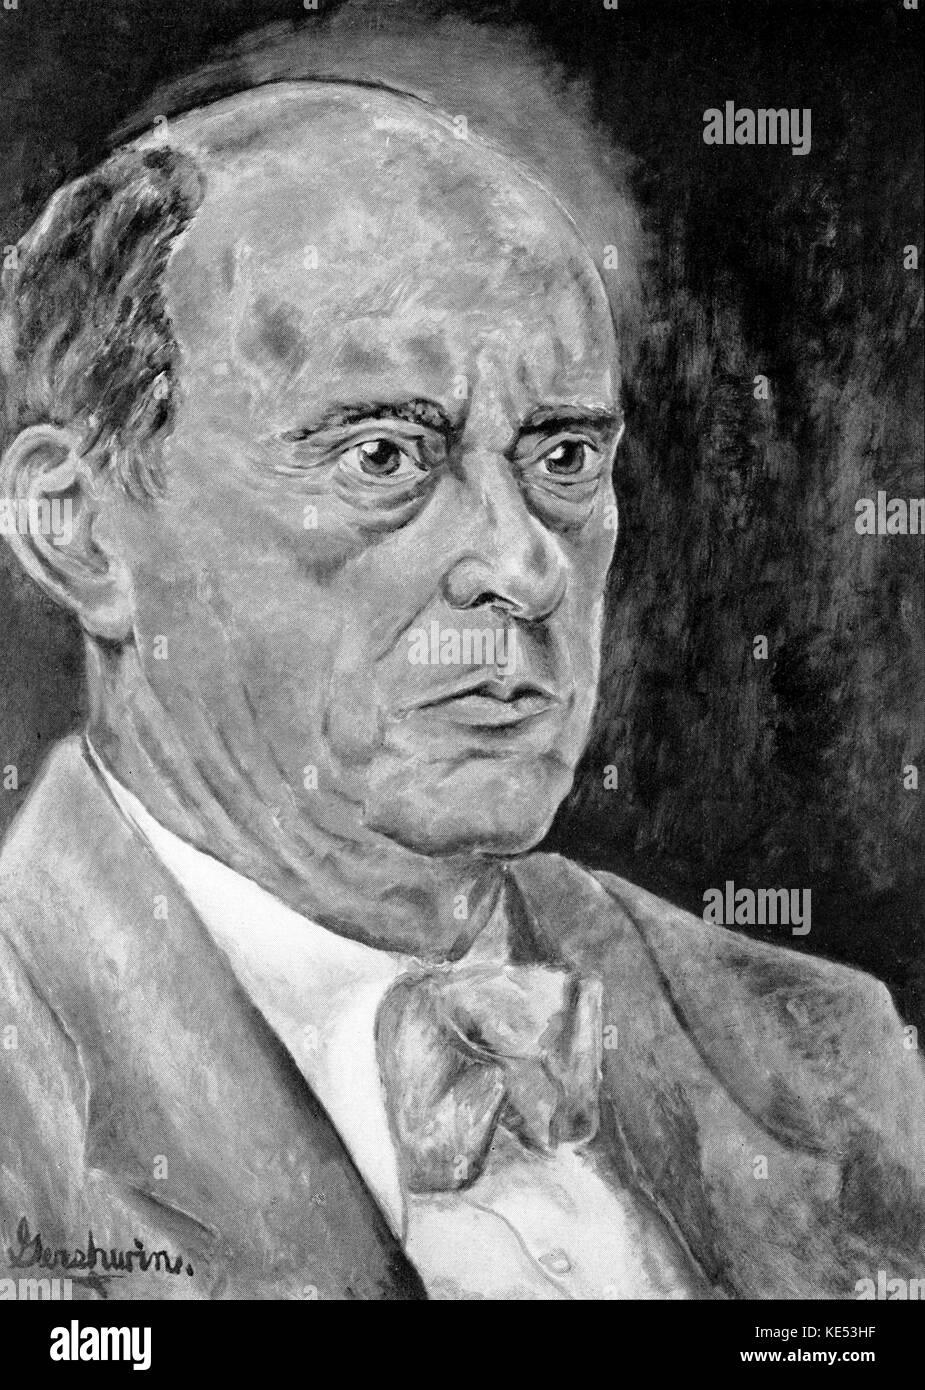 George Gershwin 's painting ofArnold Schoenberg 1937 (Austrian composer, 13 April 1874 - 13 July 1951). GG: American composer & pianist, 26th September 1898 - 11th July 1937 Stock Photo